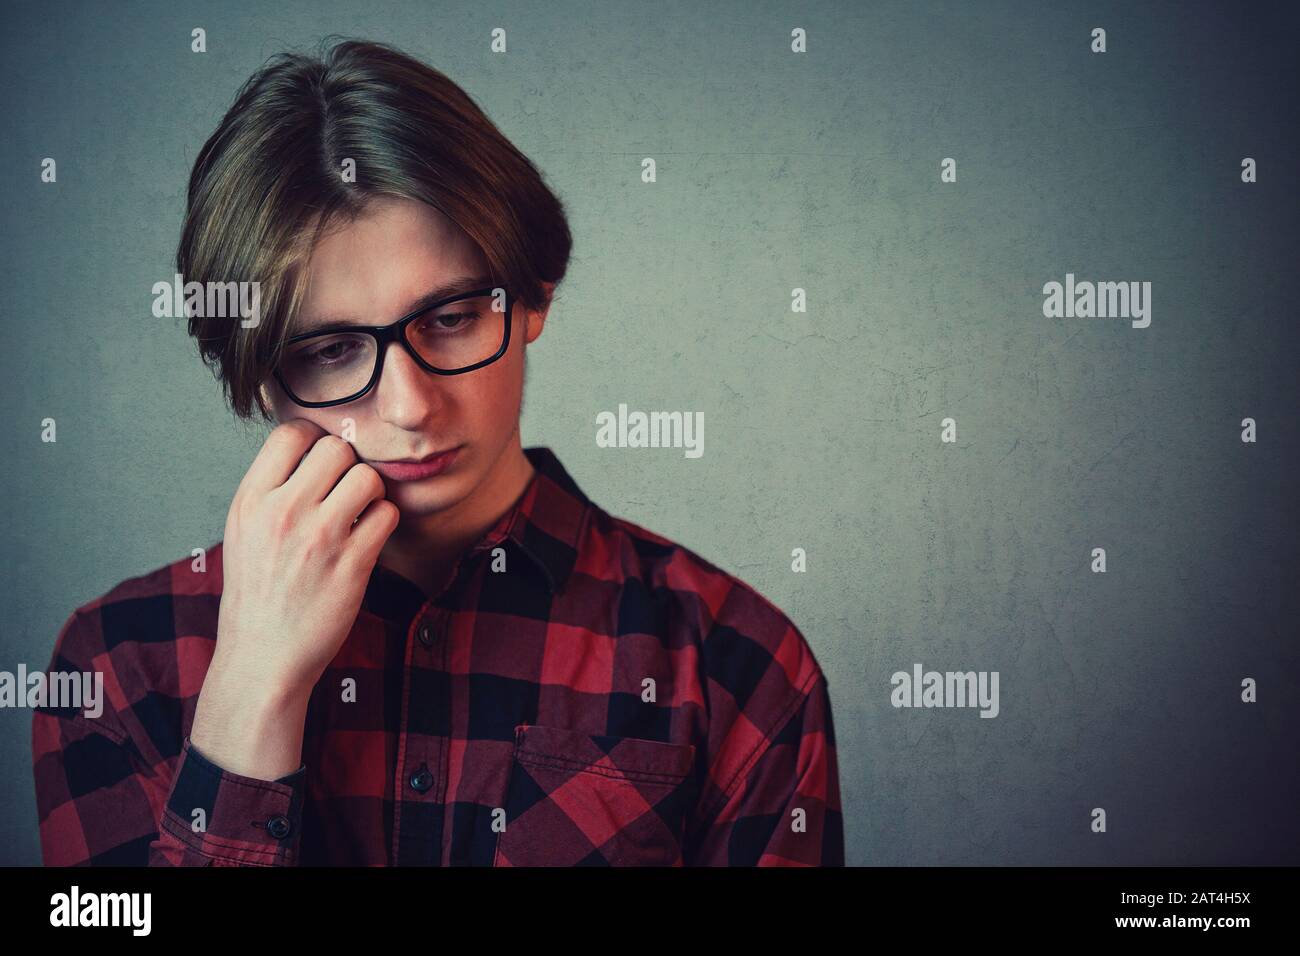 Closeup portrait of sad and thoughtful teen guy, hand under cheek, looking down as feel guilty and ashamed isolated on grey wall. Upset boy experienci Stock Photo